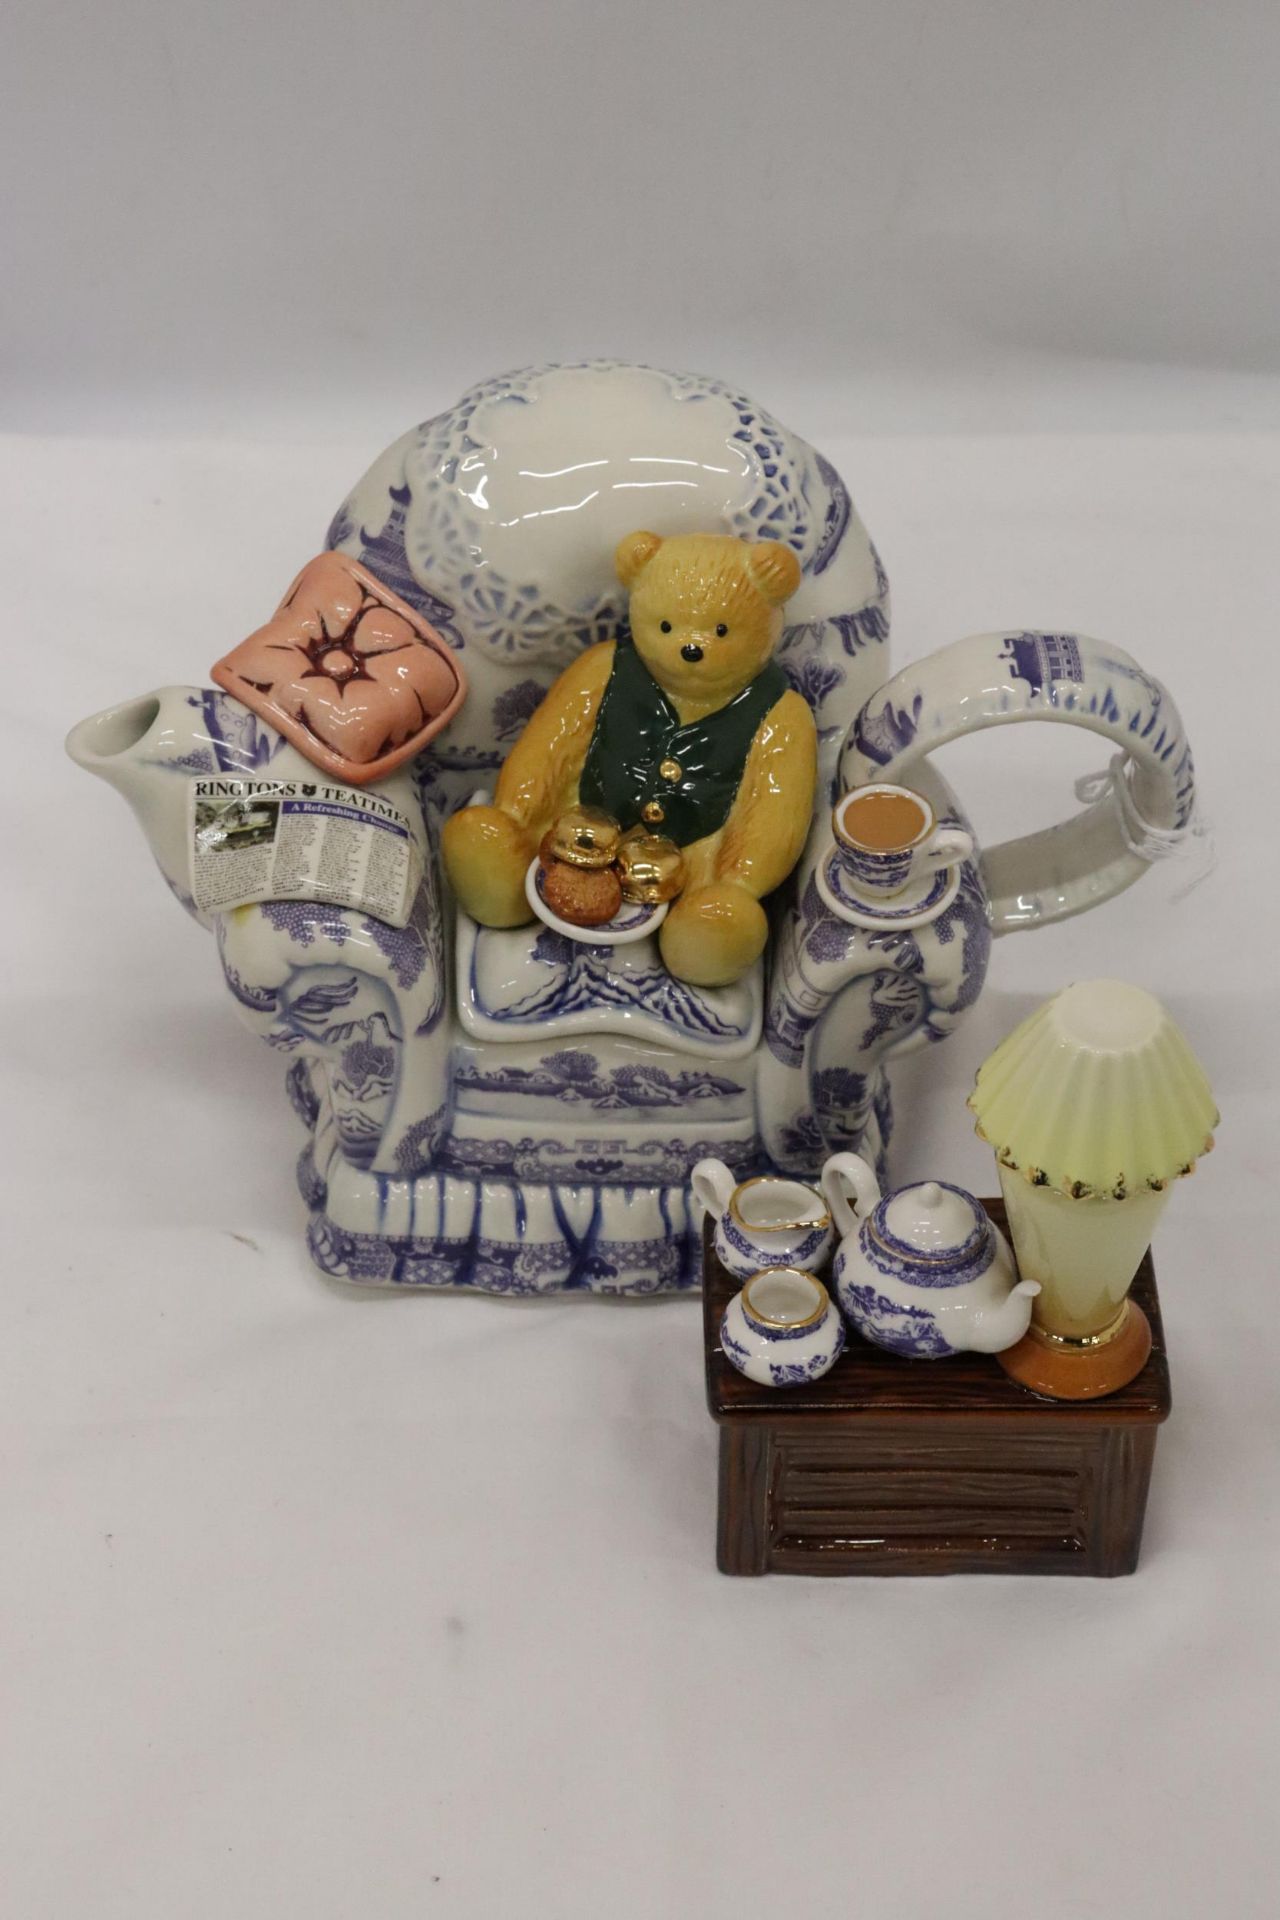 A RINGTONS LIMITED EDITION, 778/7500, 'TEA TIME' TEAPOT, IN GOOD CONDITION WITH CERTIFICATE OF - Image 10 of 10